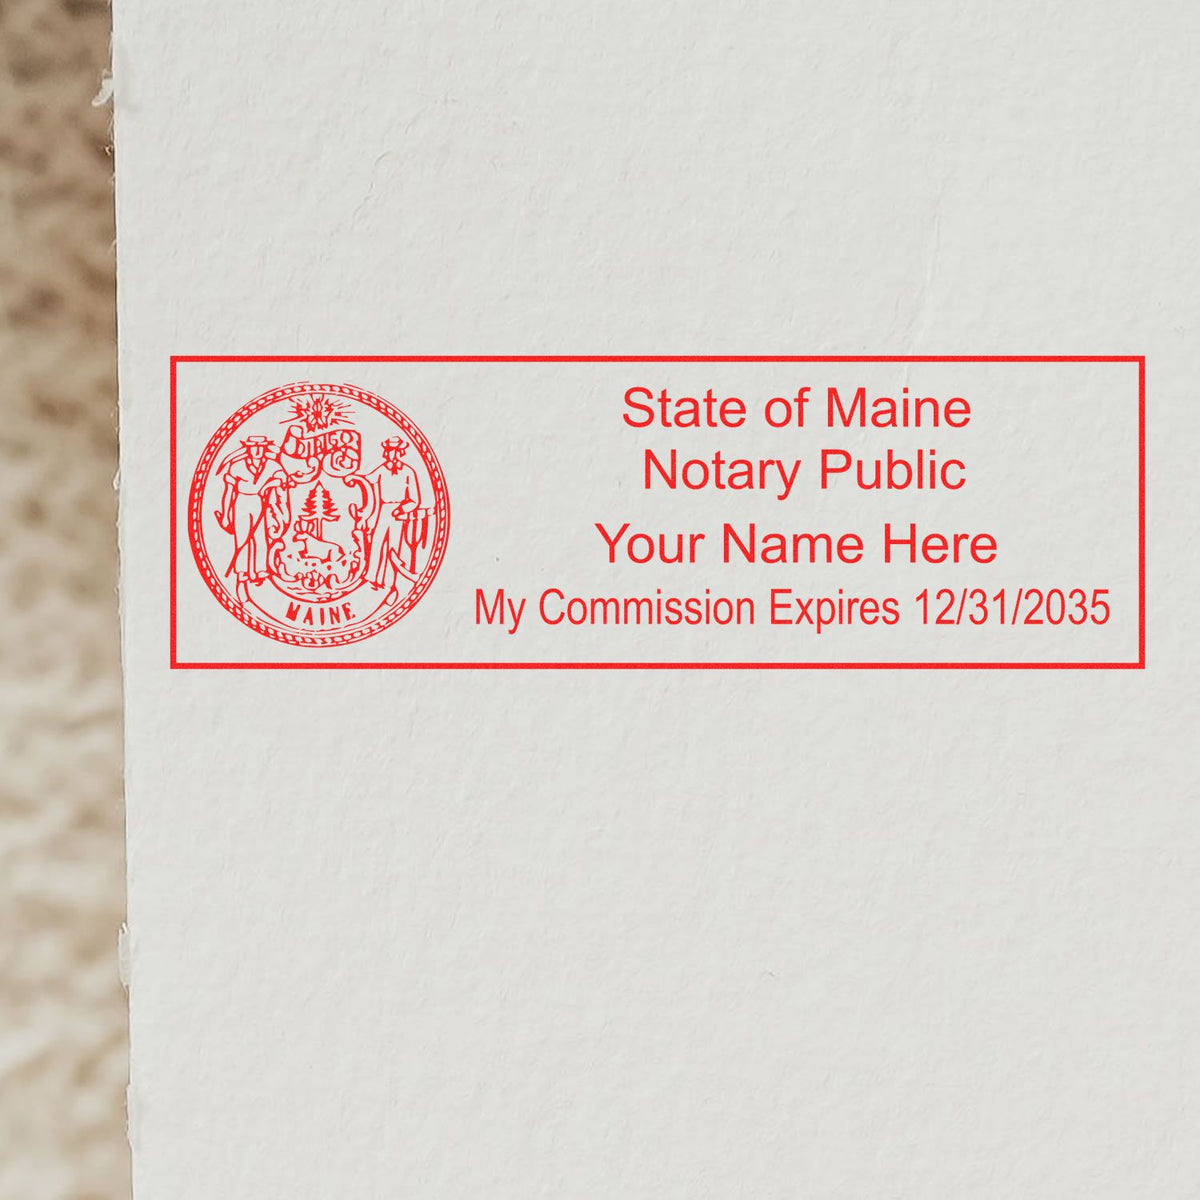 Another Example of a stamped impression of the Super Slim Maine Notary Public Stamp on a piece of office paper.